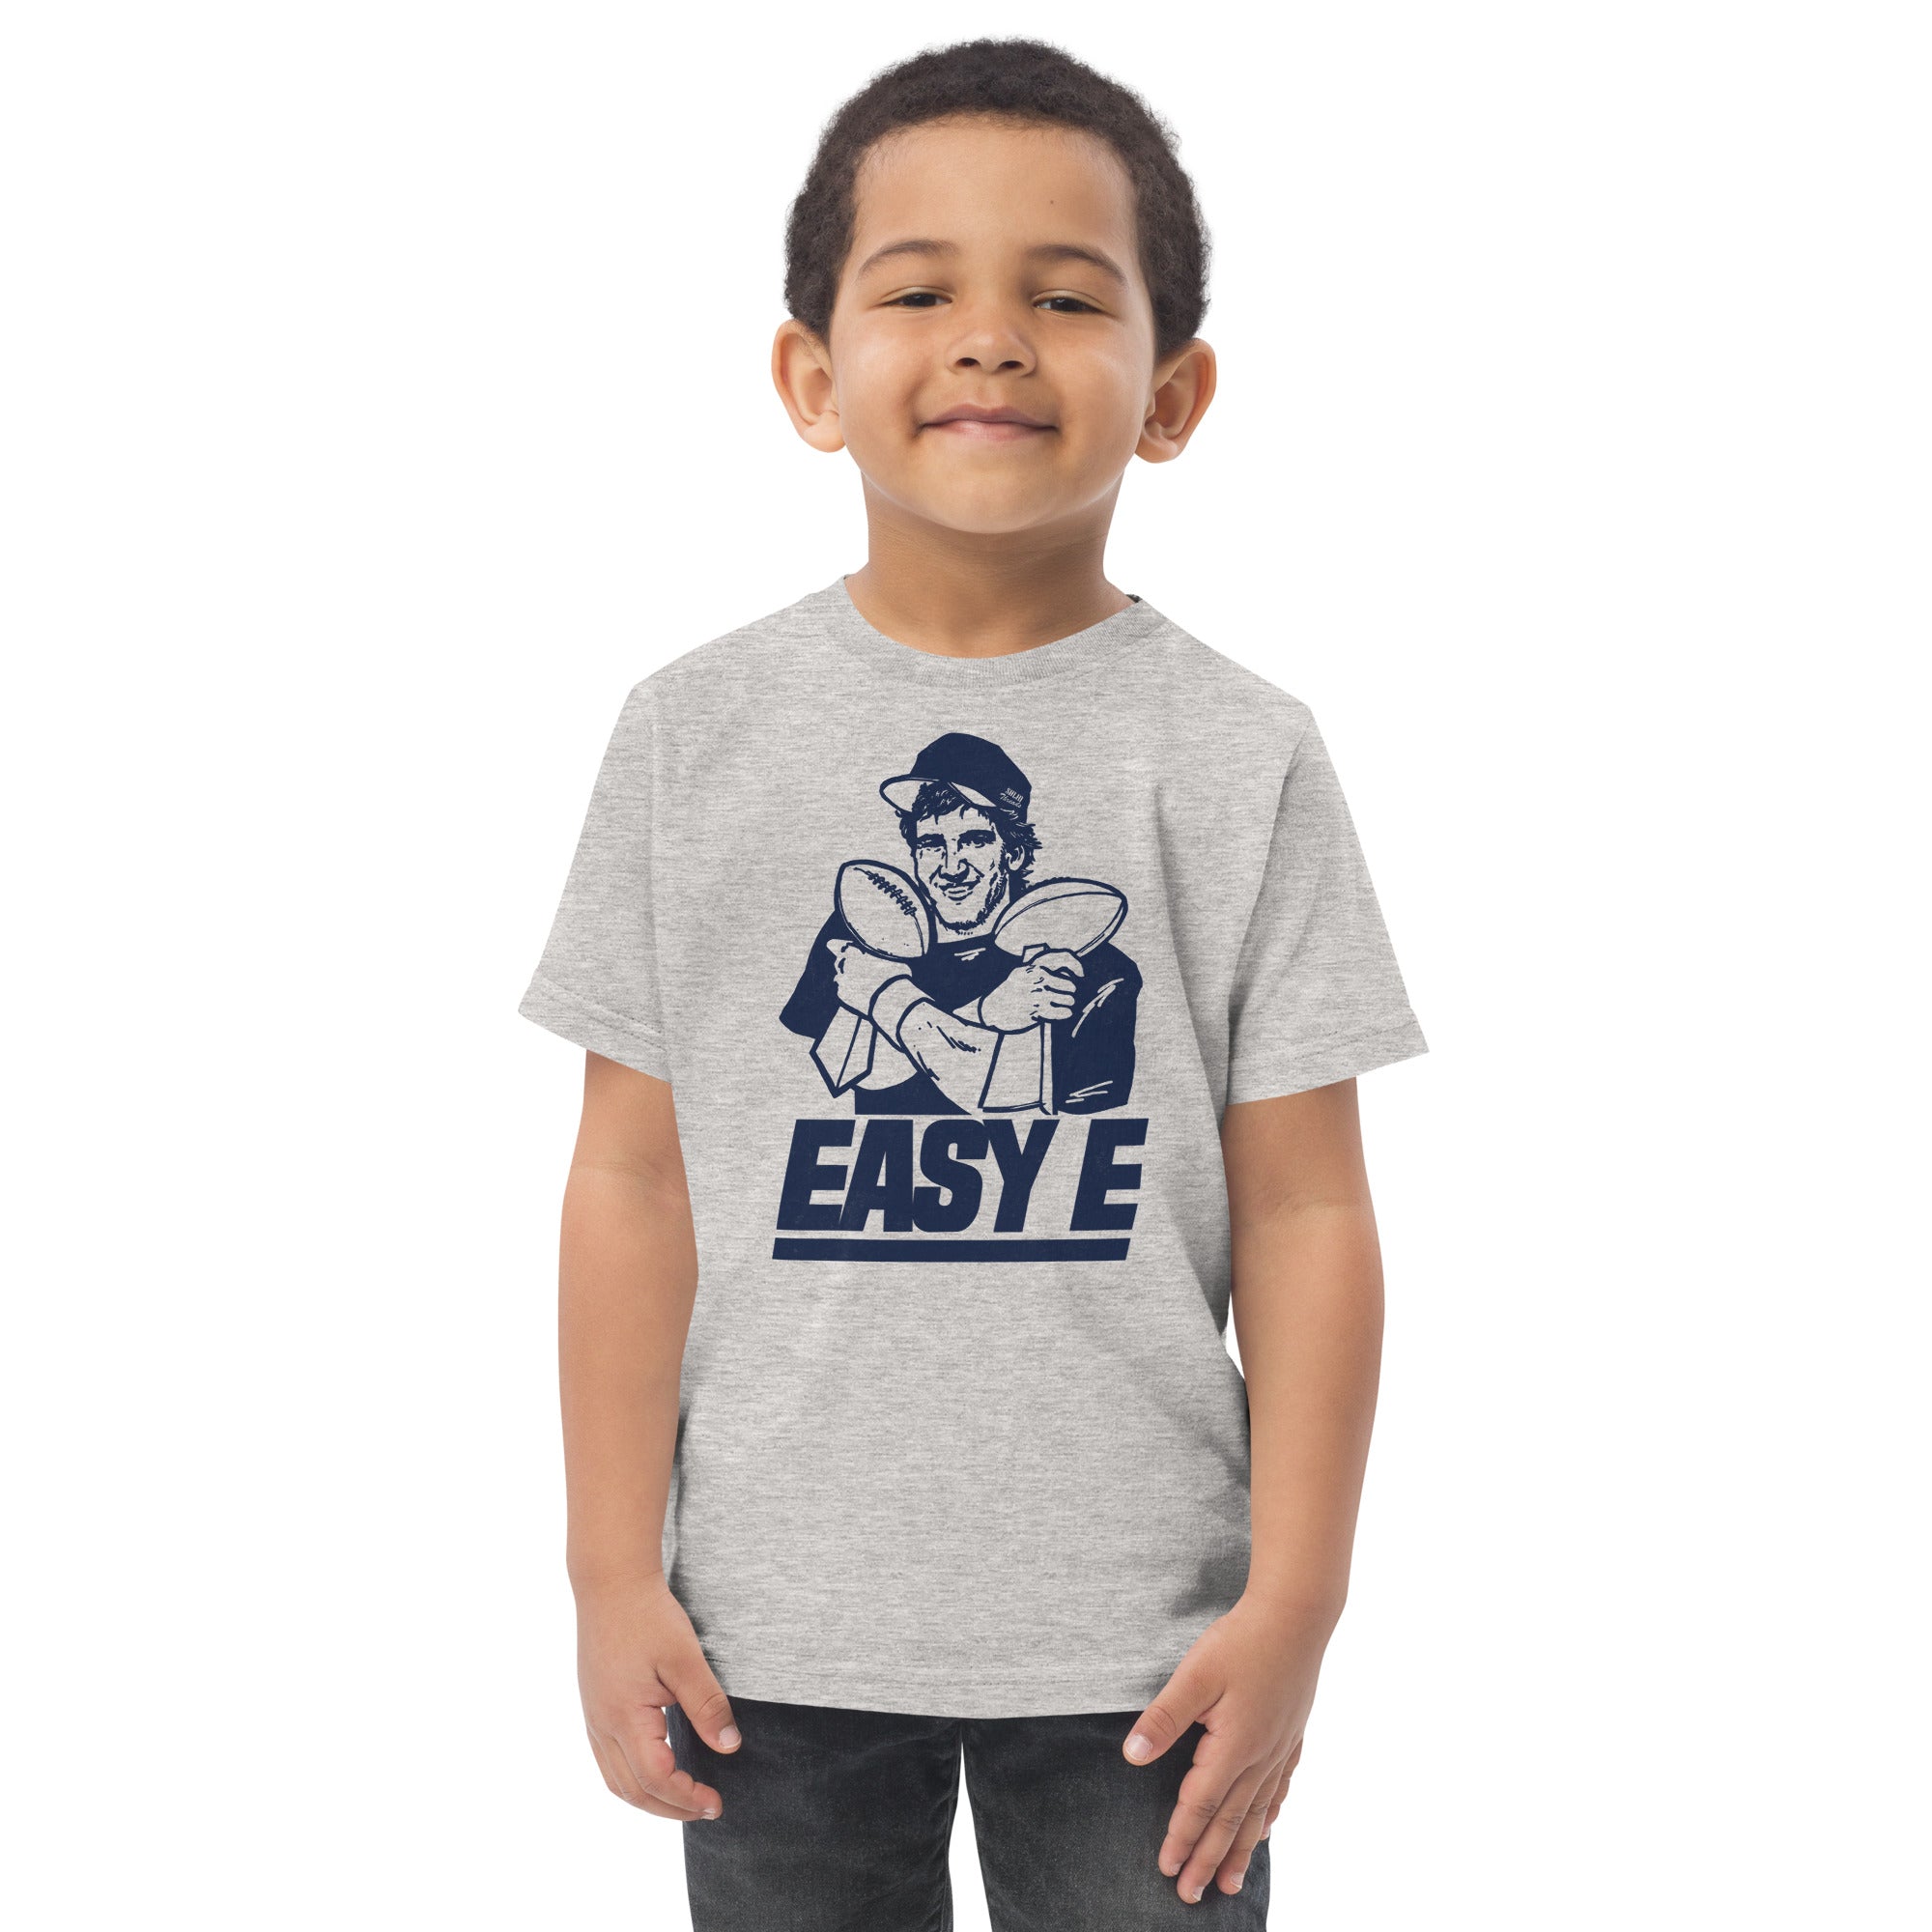 Toddler's Easy E Retro Football Extra Soft T-Shirt | Funny Ny Giants Tee On Model | Solid Threads